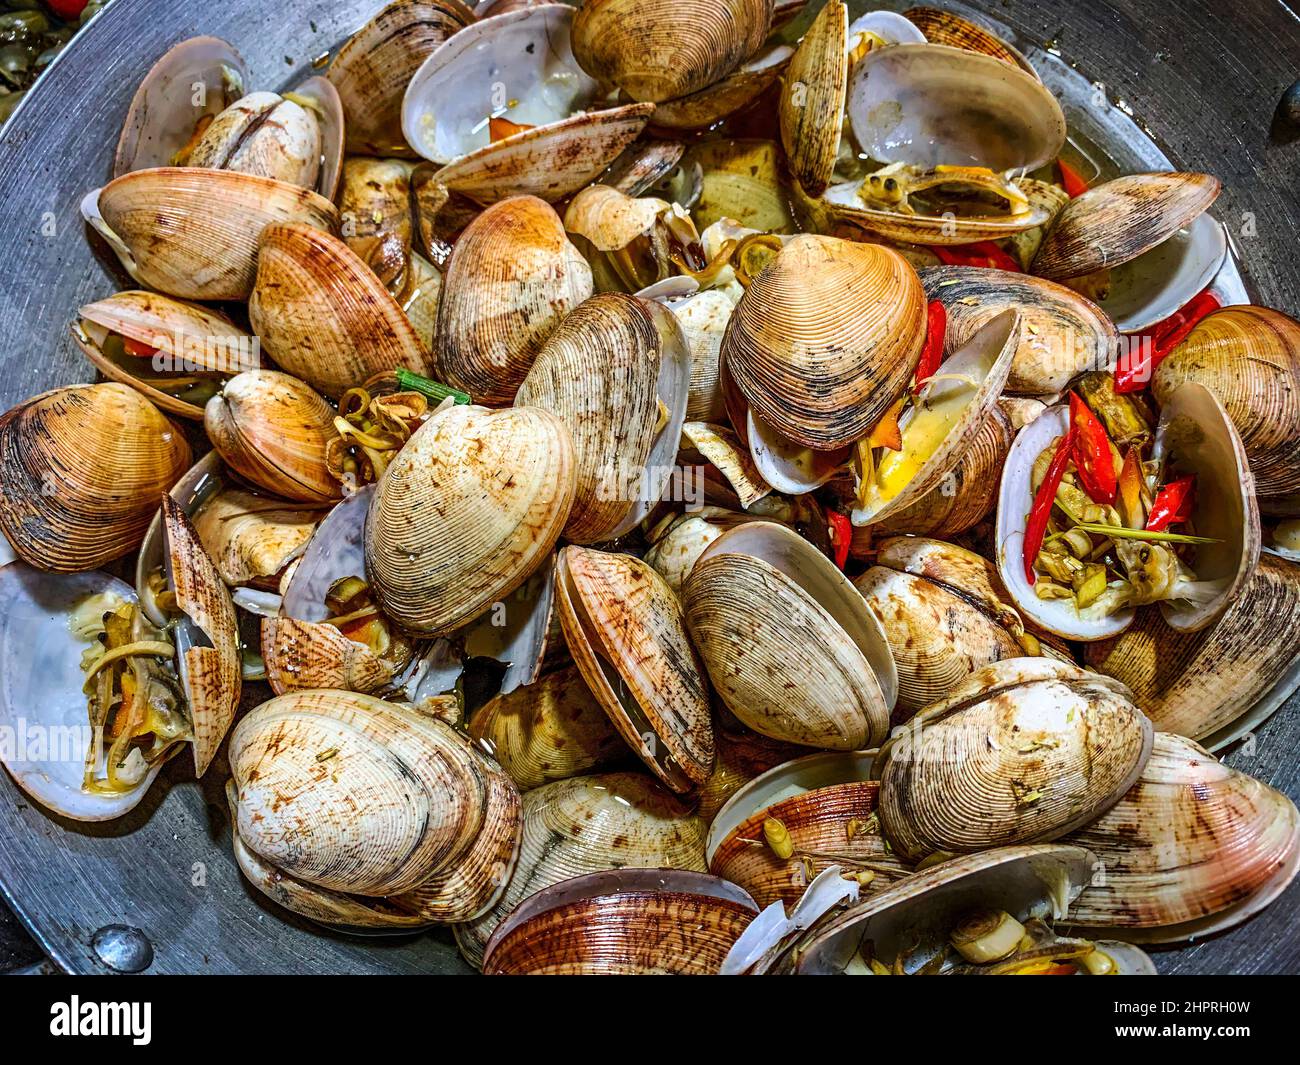 Seafood Clams from Tam Thanh, Vietnam Stock Photo